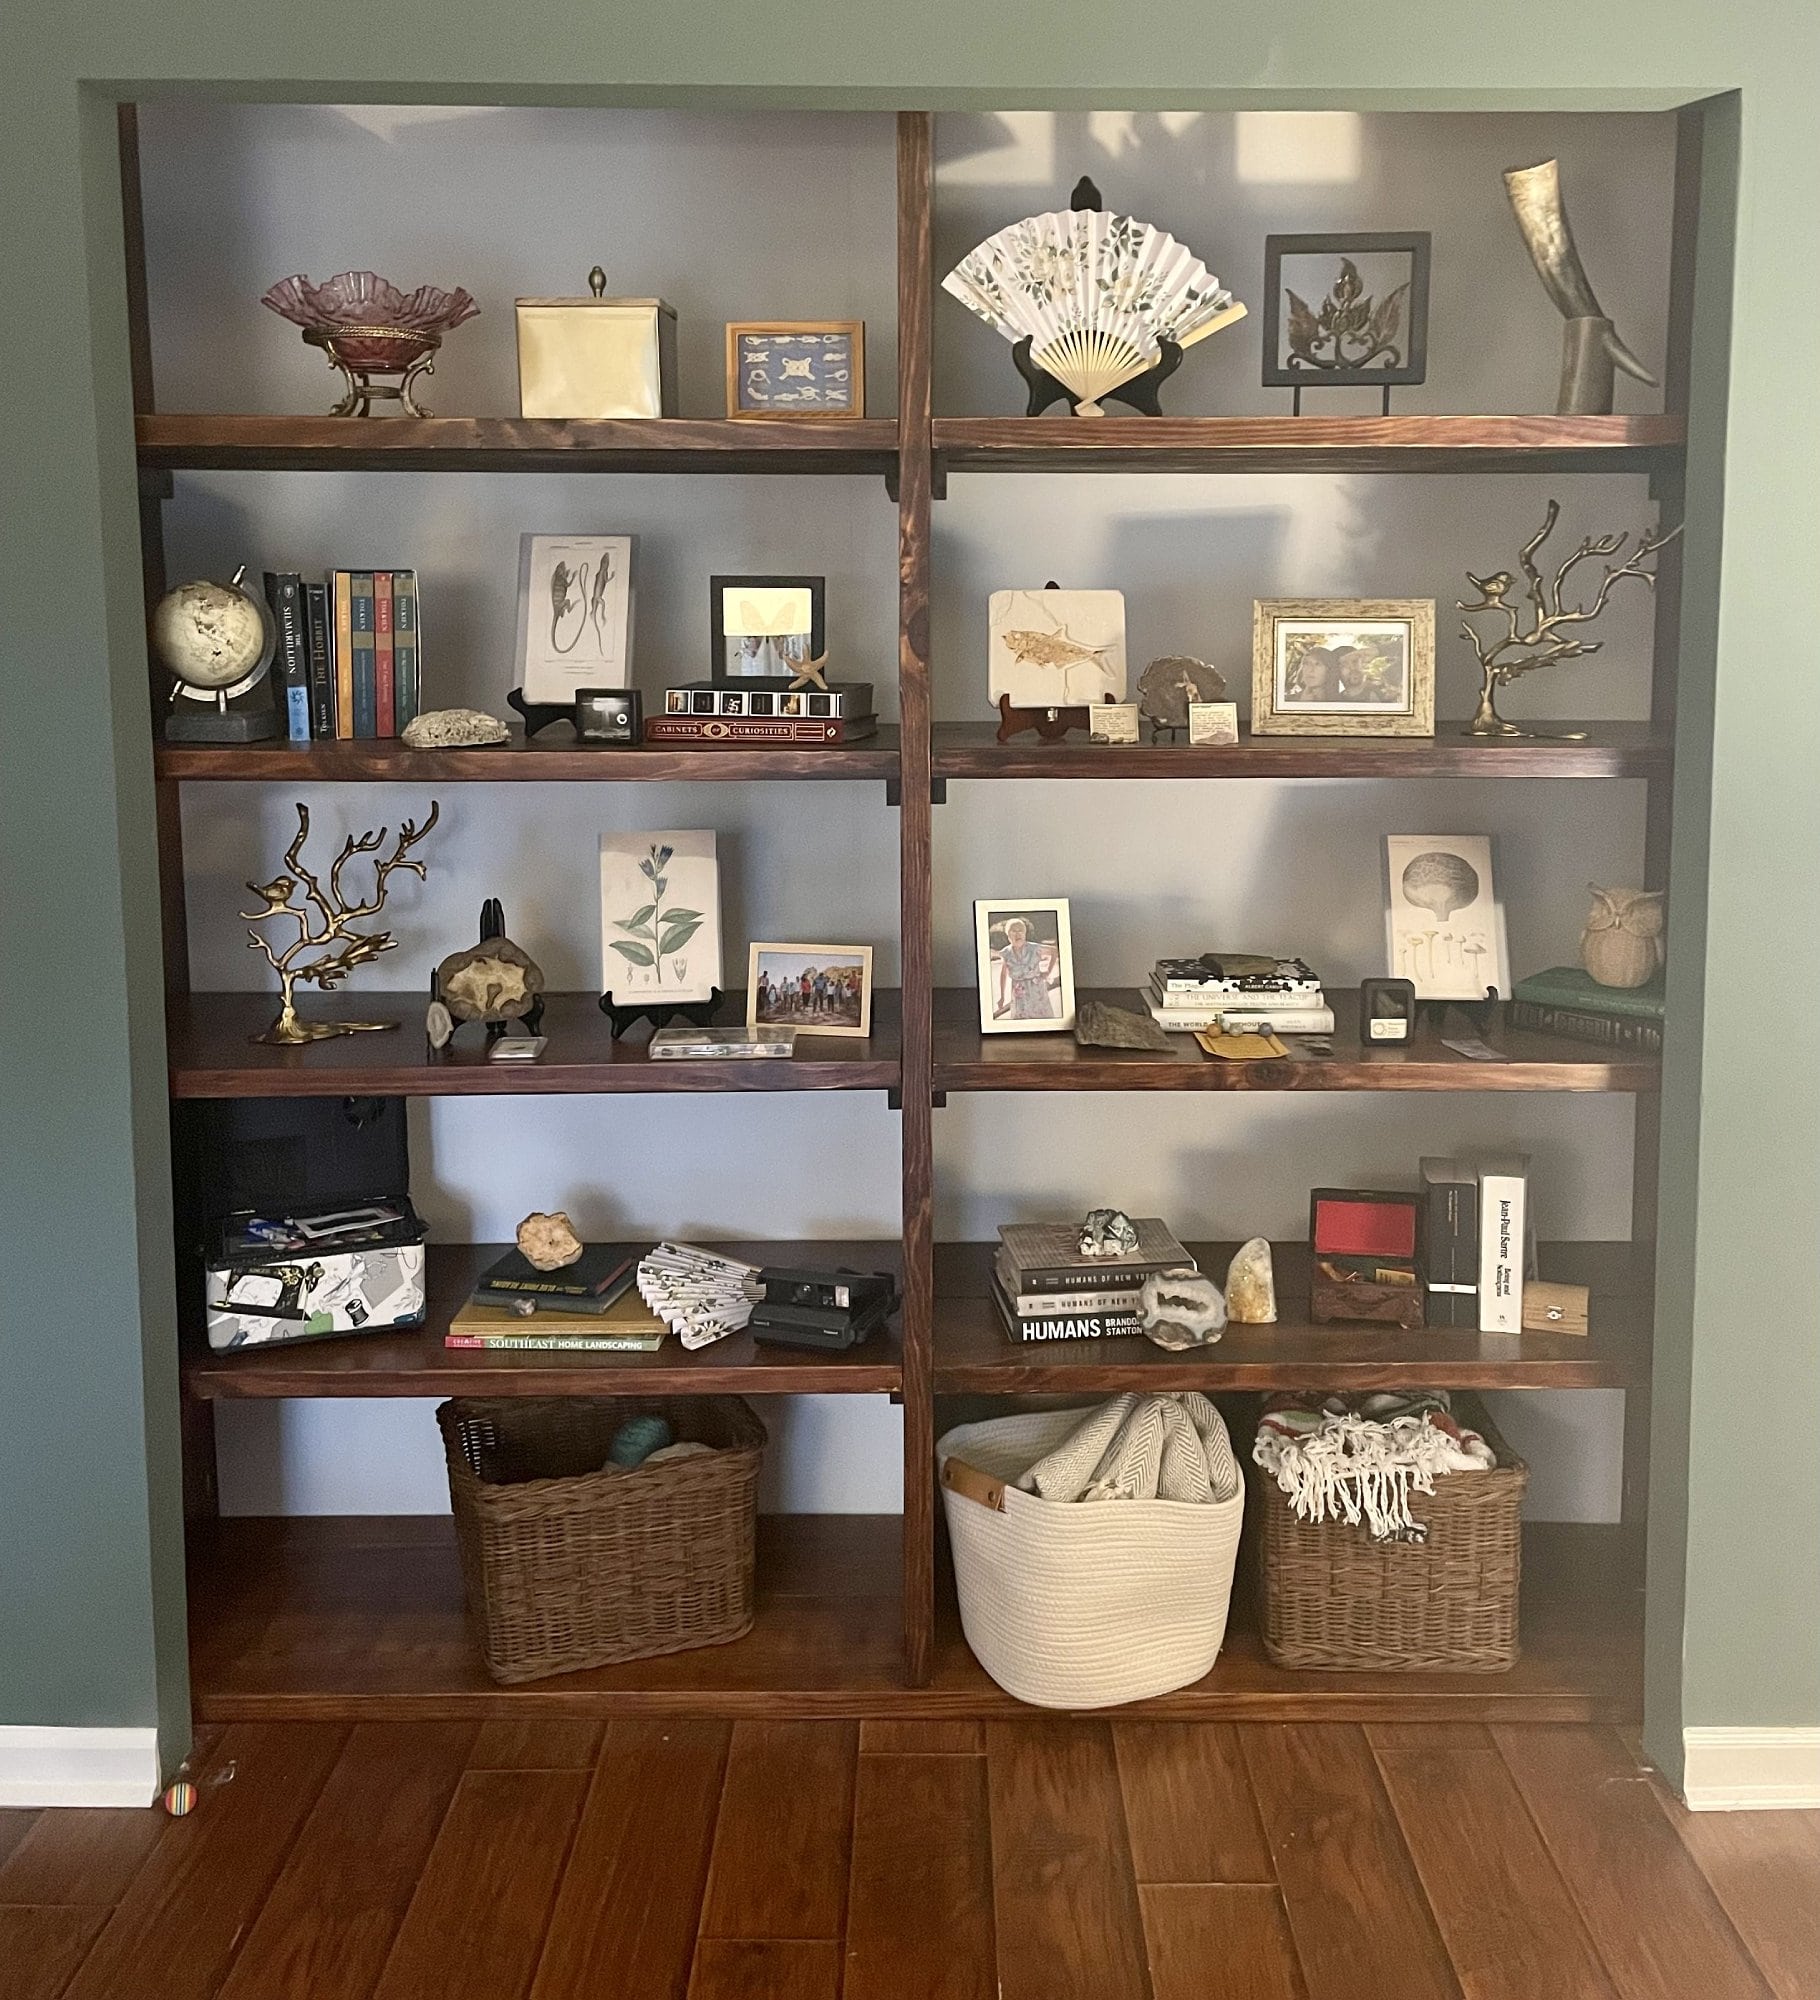 A built-in bookcase displaying a collection of some trinkets and natural history objects, such as rocks, geodes, bones, and plant diagrams